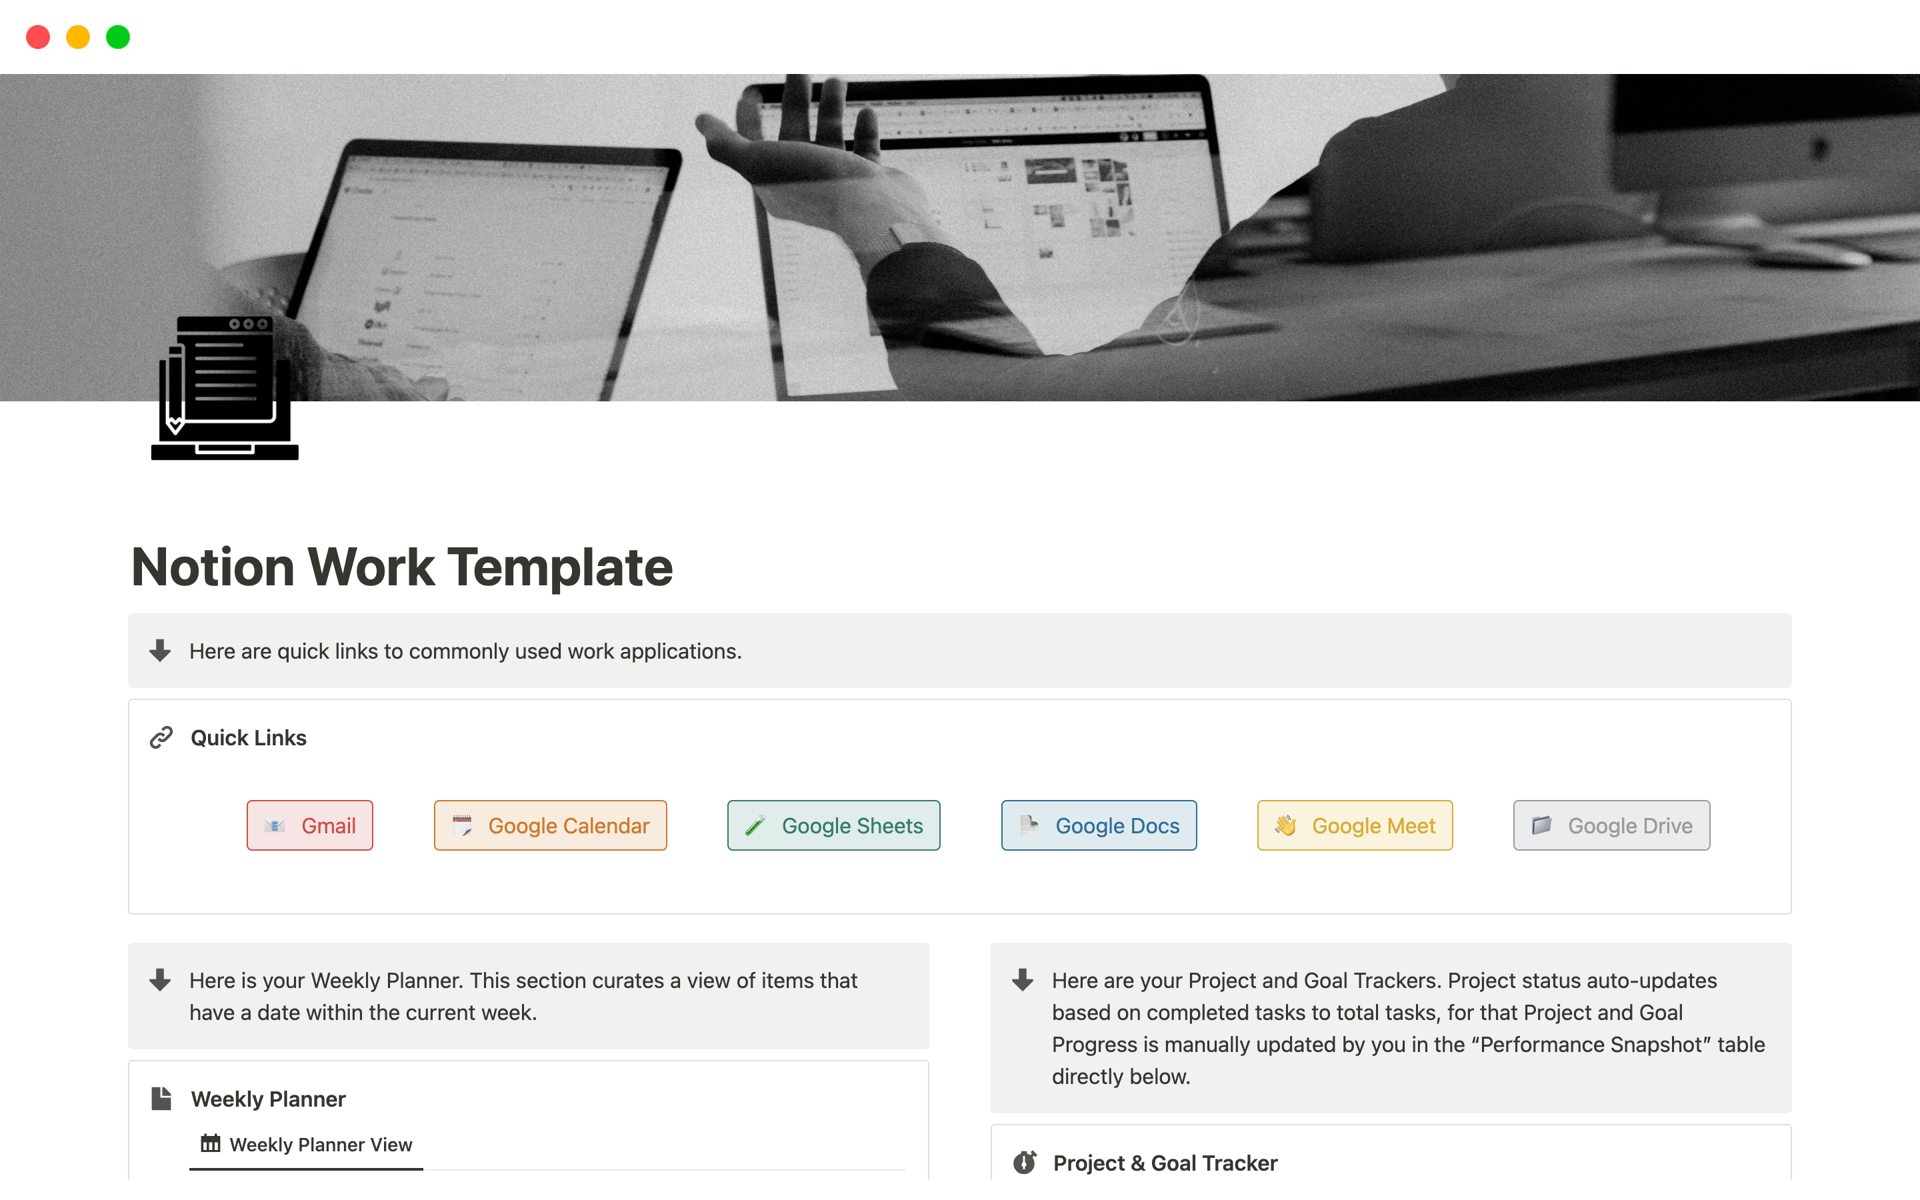 The Notion Work Template combines your Google and Outlook Calendars and brings together tasks, projects, OKRs, and a knowledge base all within one workspace.